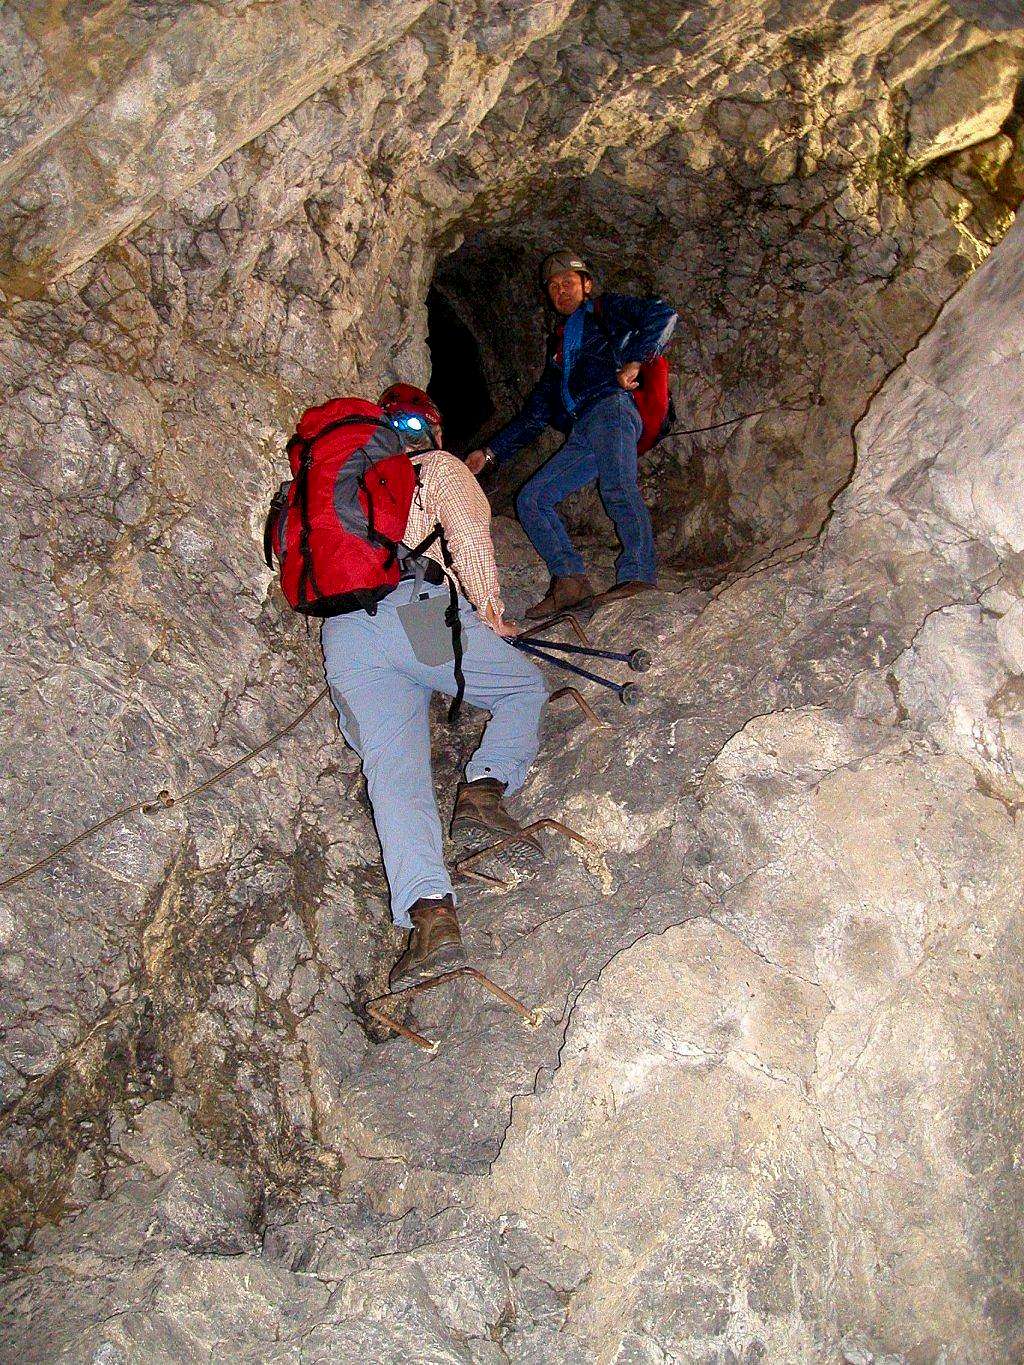 Ascent through the very steep tunnel.